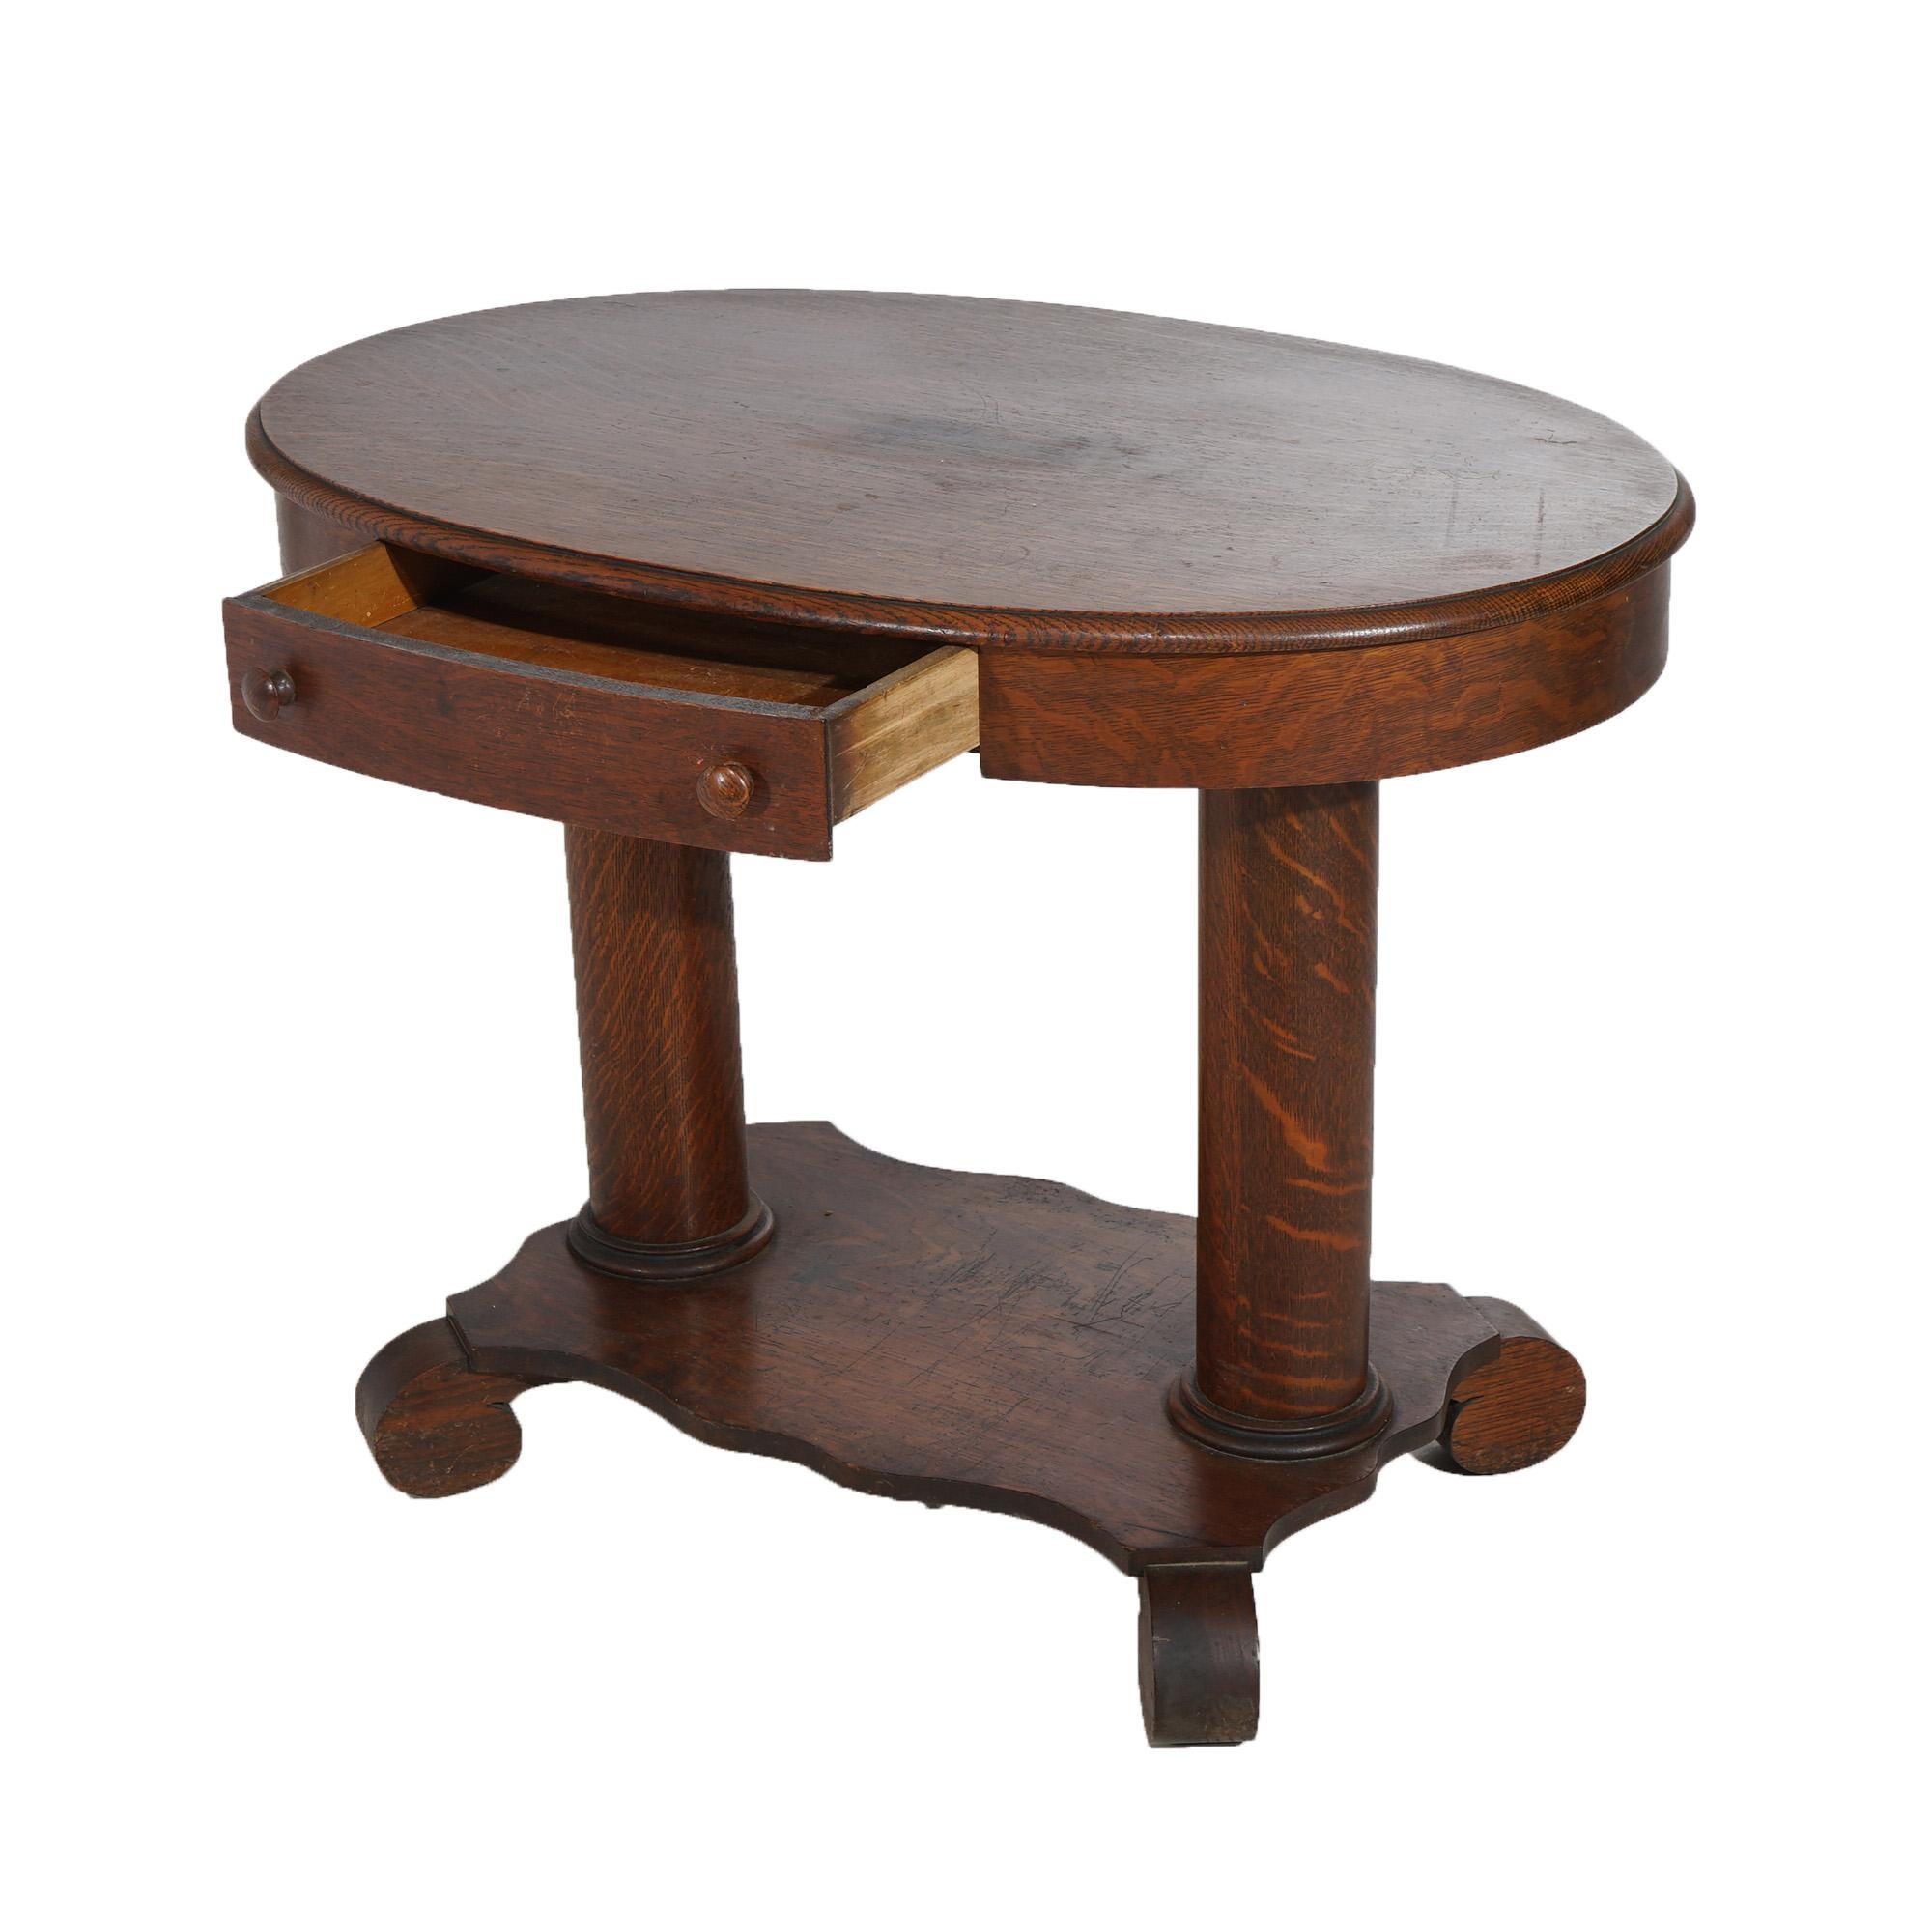 American Antique Arts & Crafts Oak Oval Library Table Circa 1910